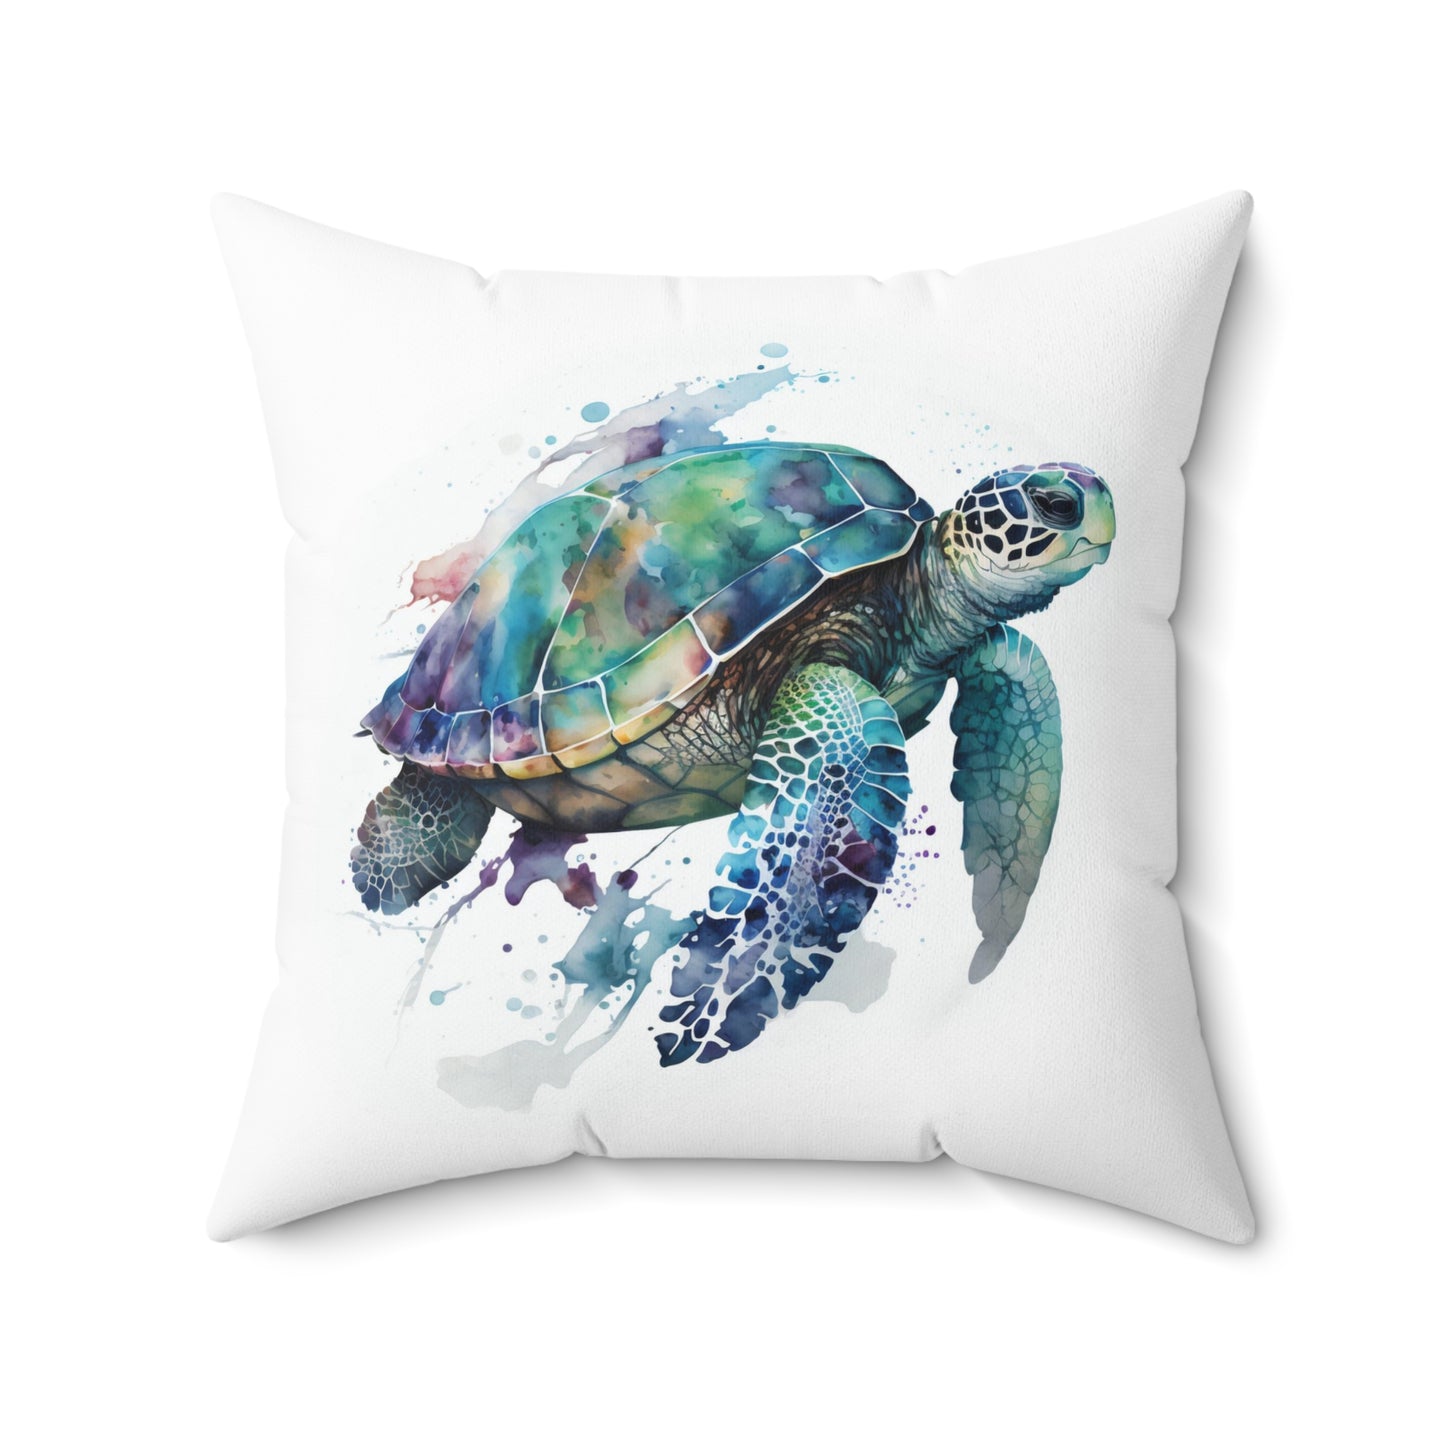 Sea Turtle Throw Pillow, Watercolor Sea Turtle Decorative Pillow, Square Animal Cushion, Double Sided Blue Accent Pillow, Concealed Zipper